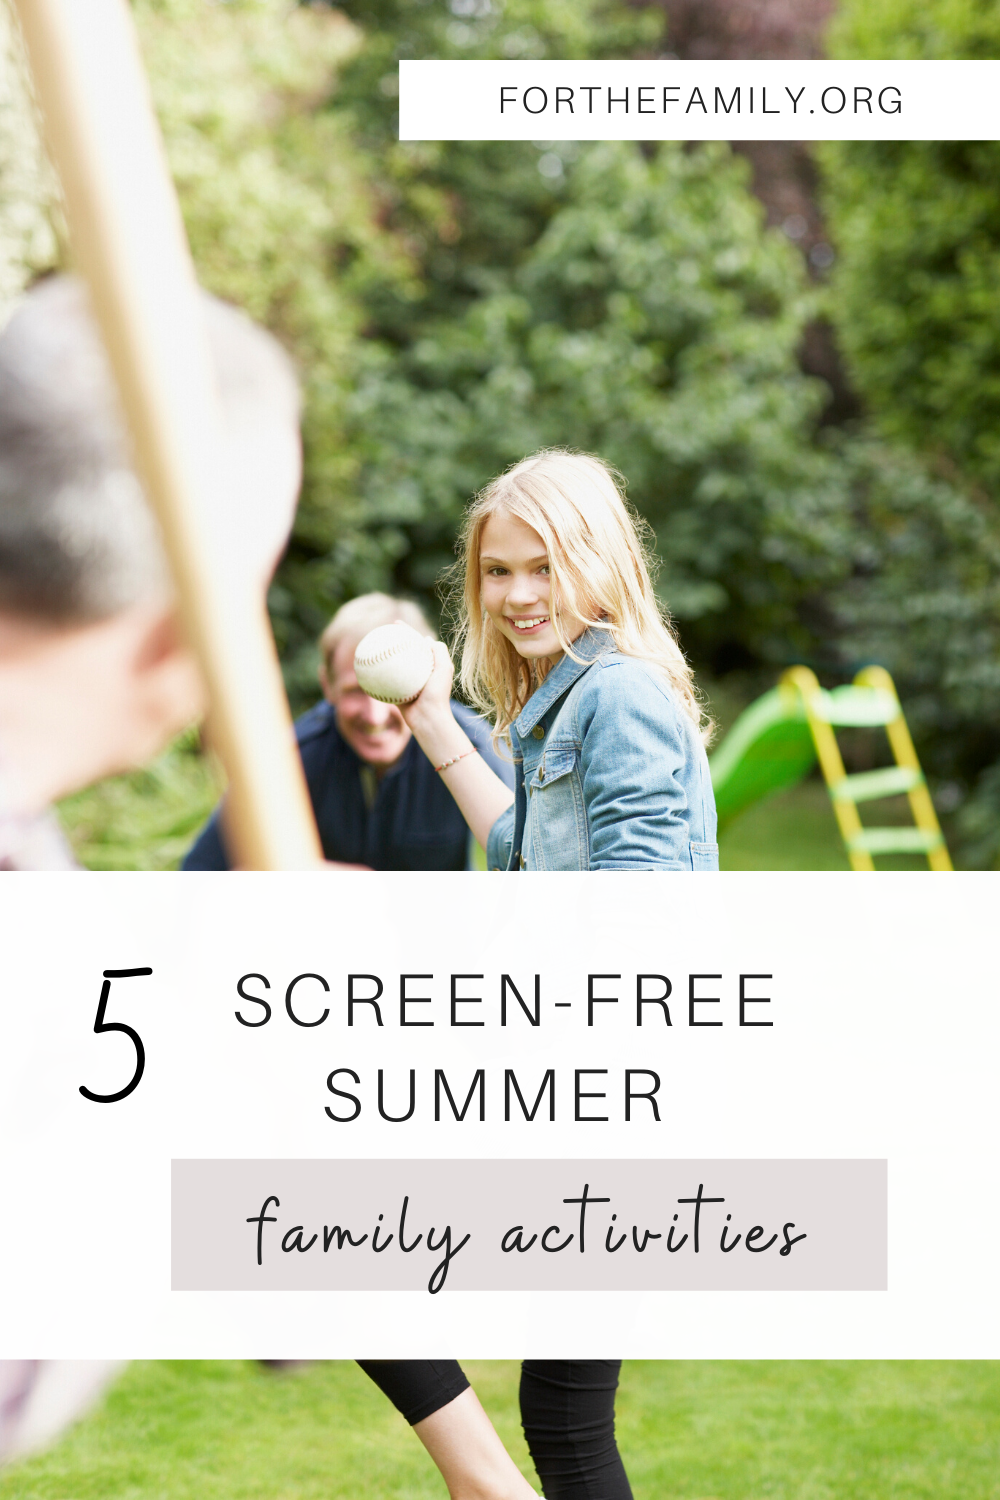 Are you considering taking the ultimate family adventure this summer and trying to go. . . unplugged? There are so many ways to connect together this summer that don't involve screen time. Here are some of our best ideas for (tech free) summer fun.